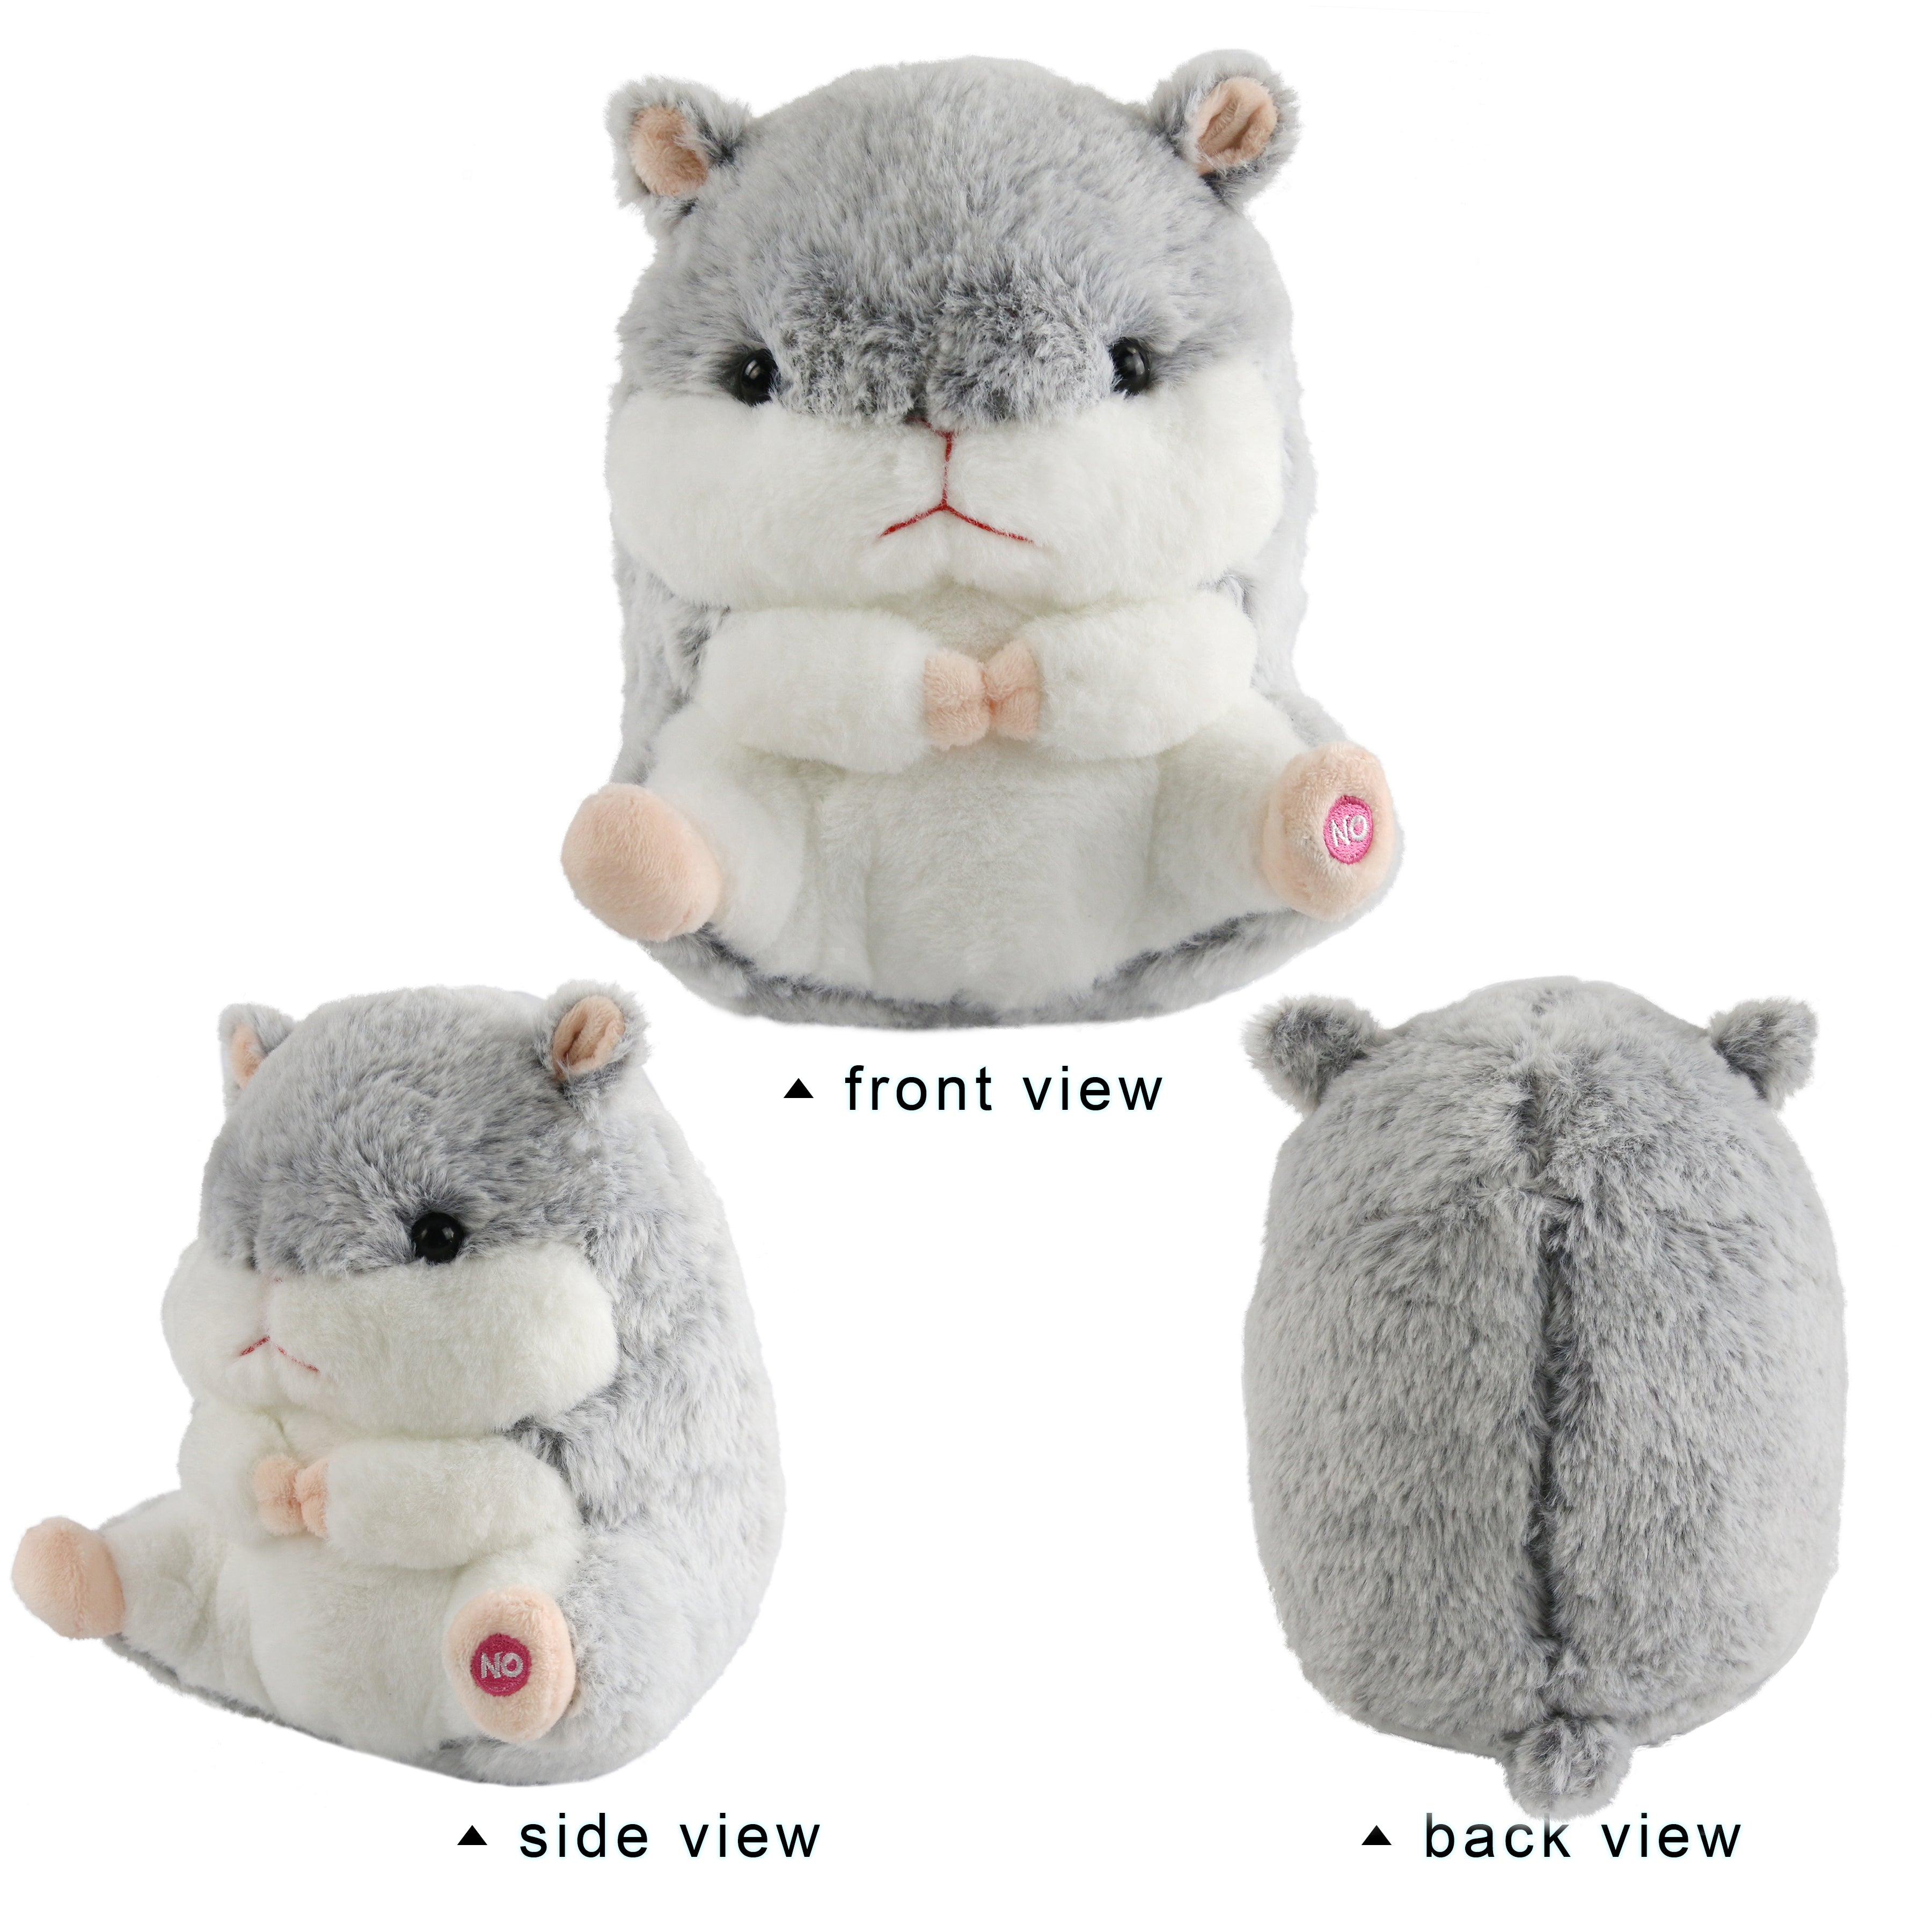 Bstaofy Hamster Stuffed Animal Mouse Plush Toy - Glow Guards